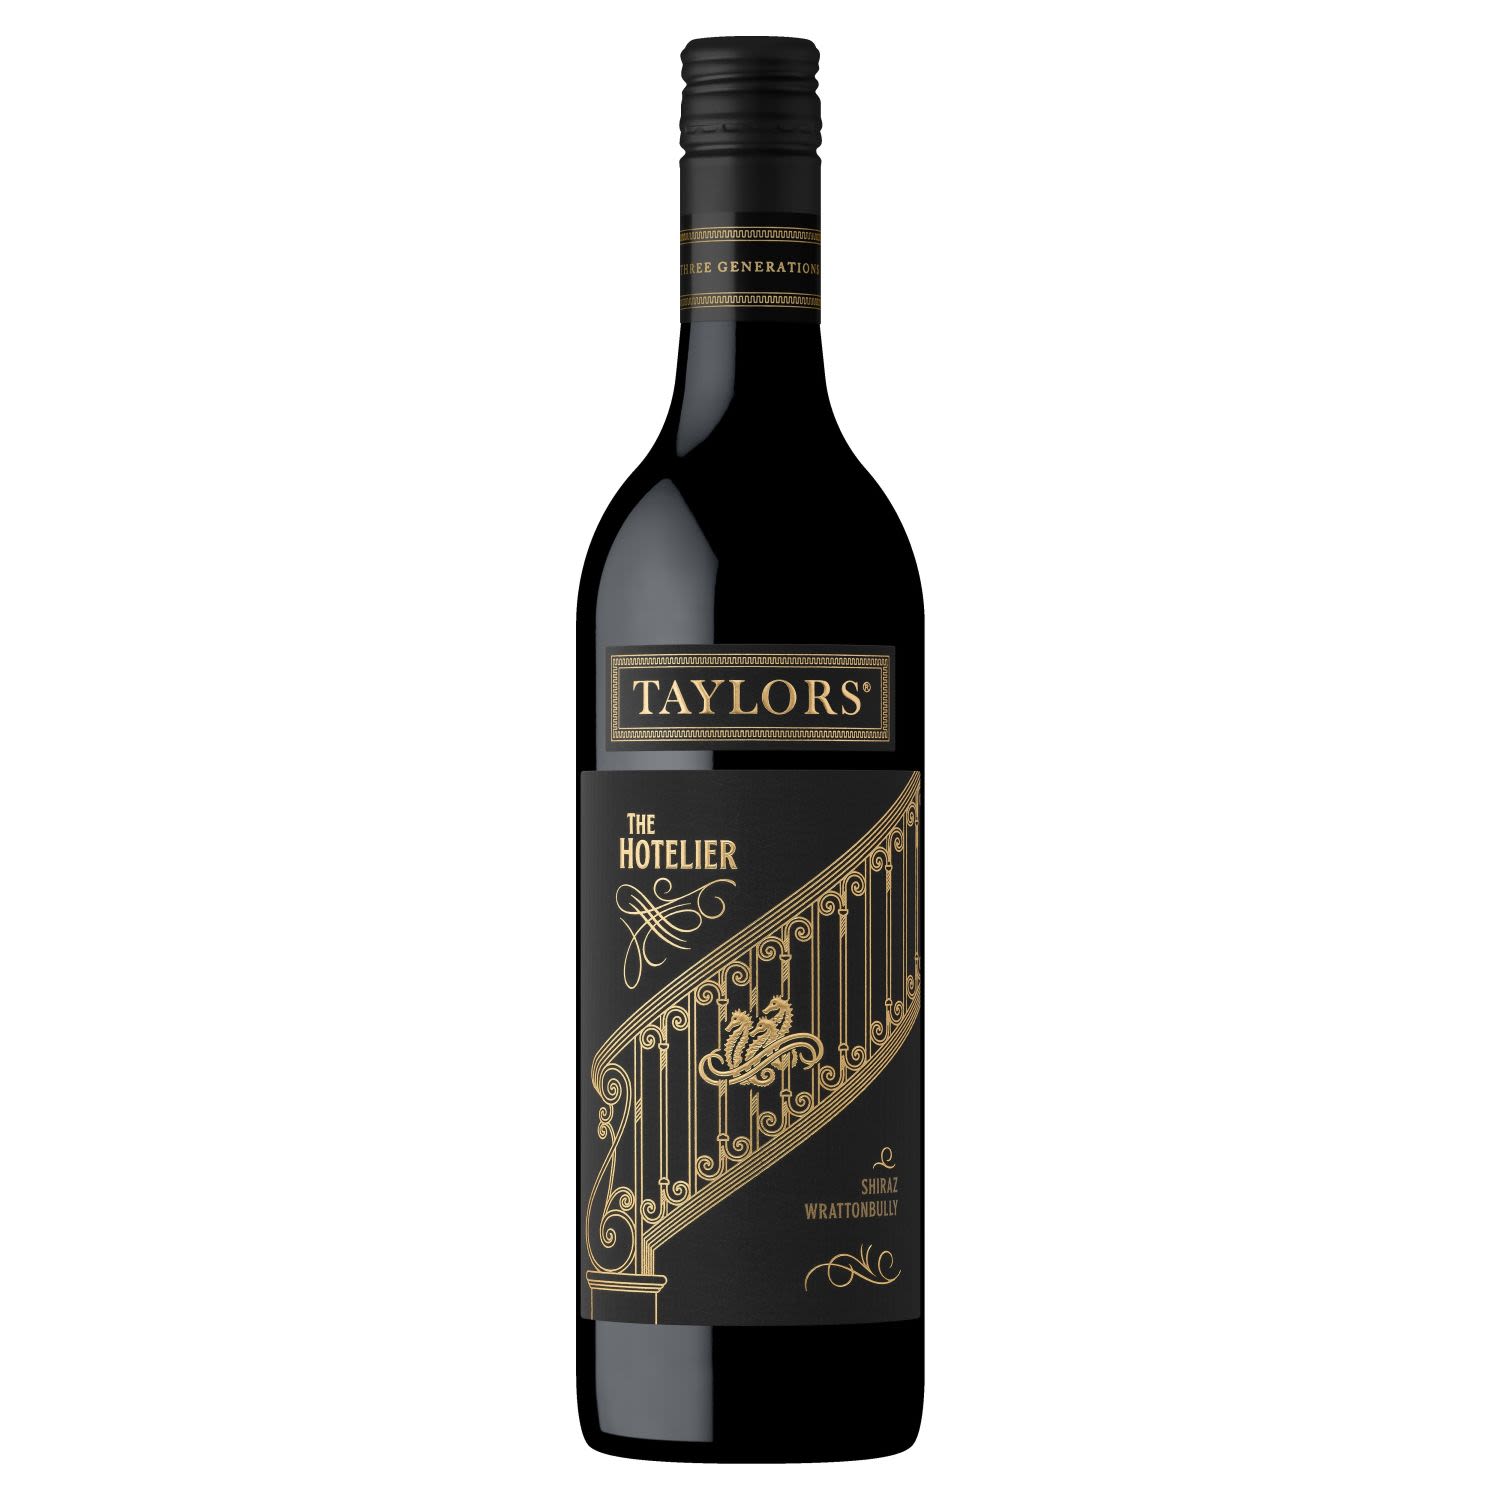 Taylors The Hotelier Shiraz 750mL 6 Pack